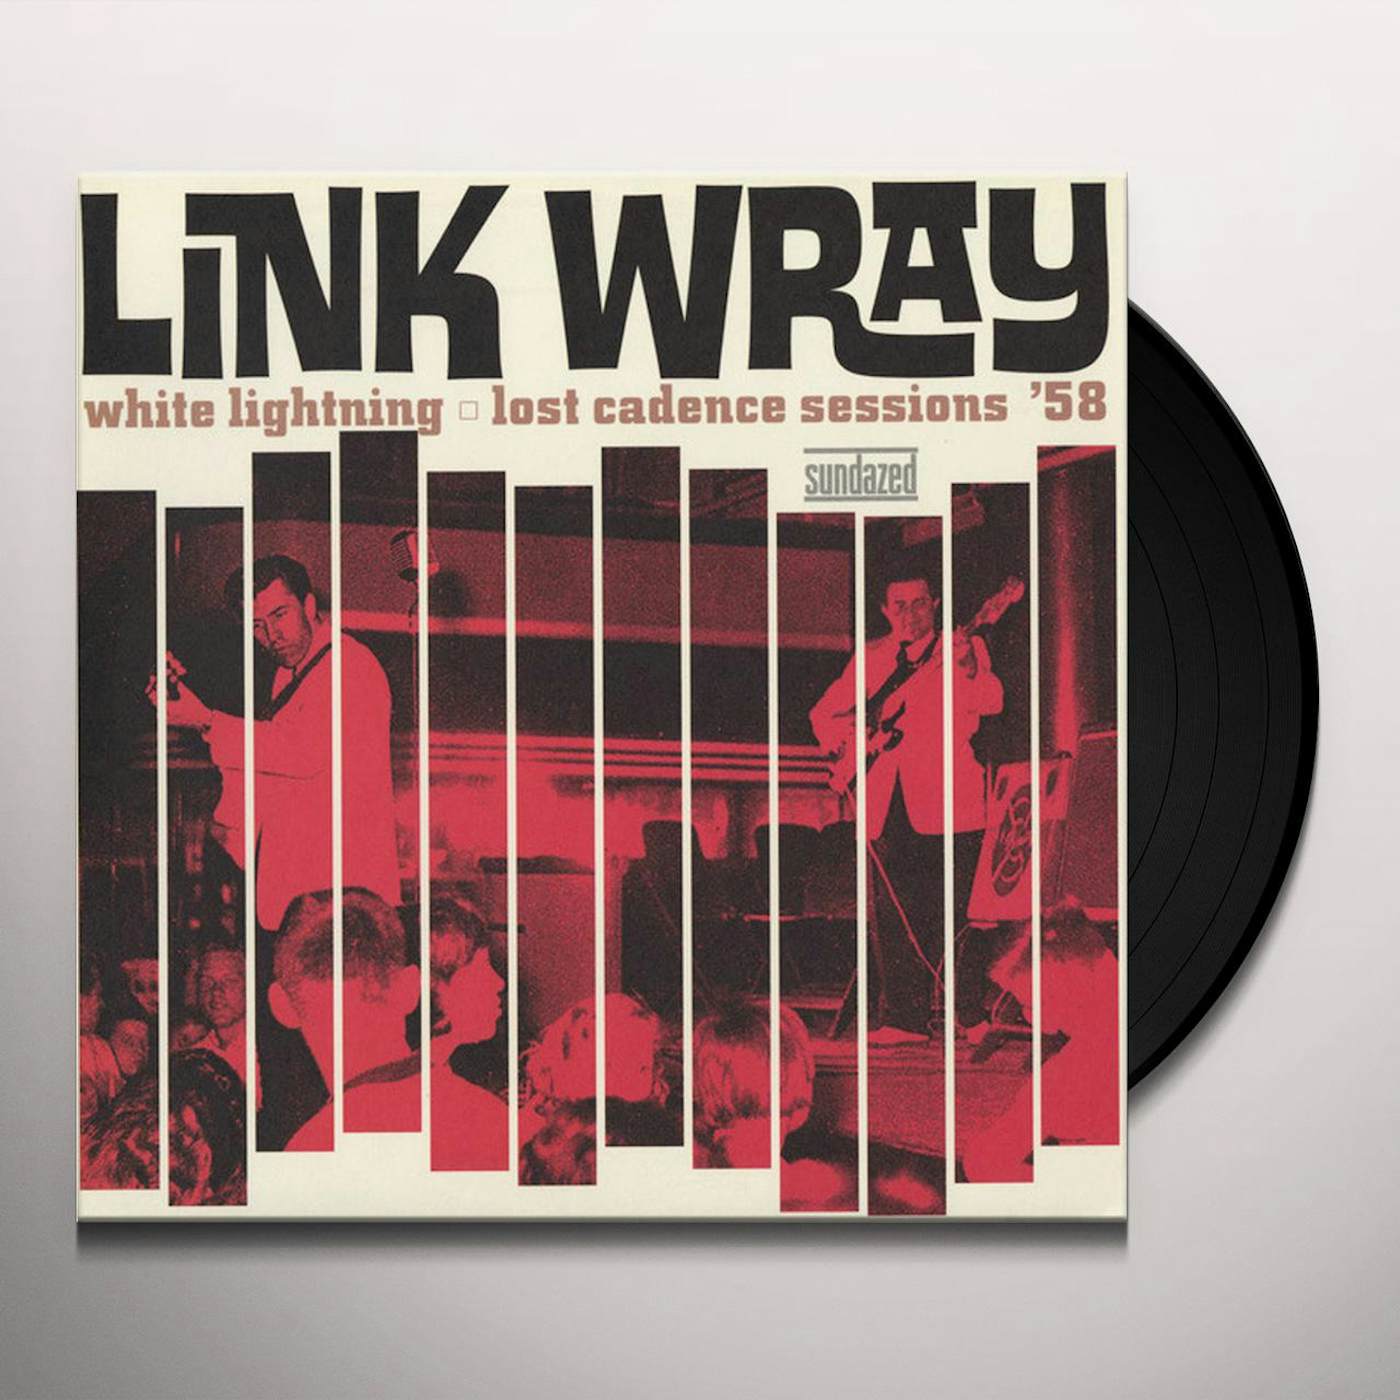 Link Wray WHITE LIGHTNING: LOST CADENCE SESSIONS Vinyl Record